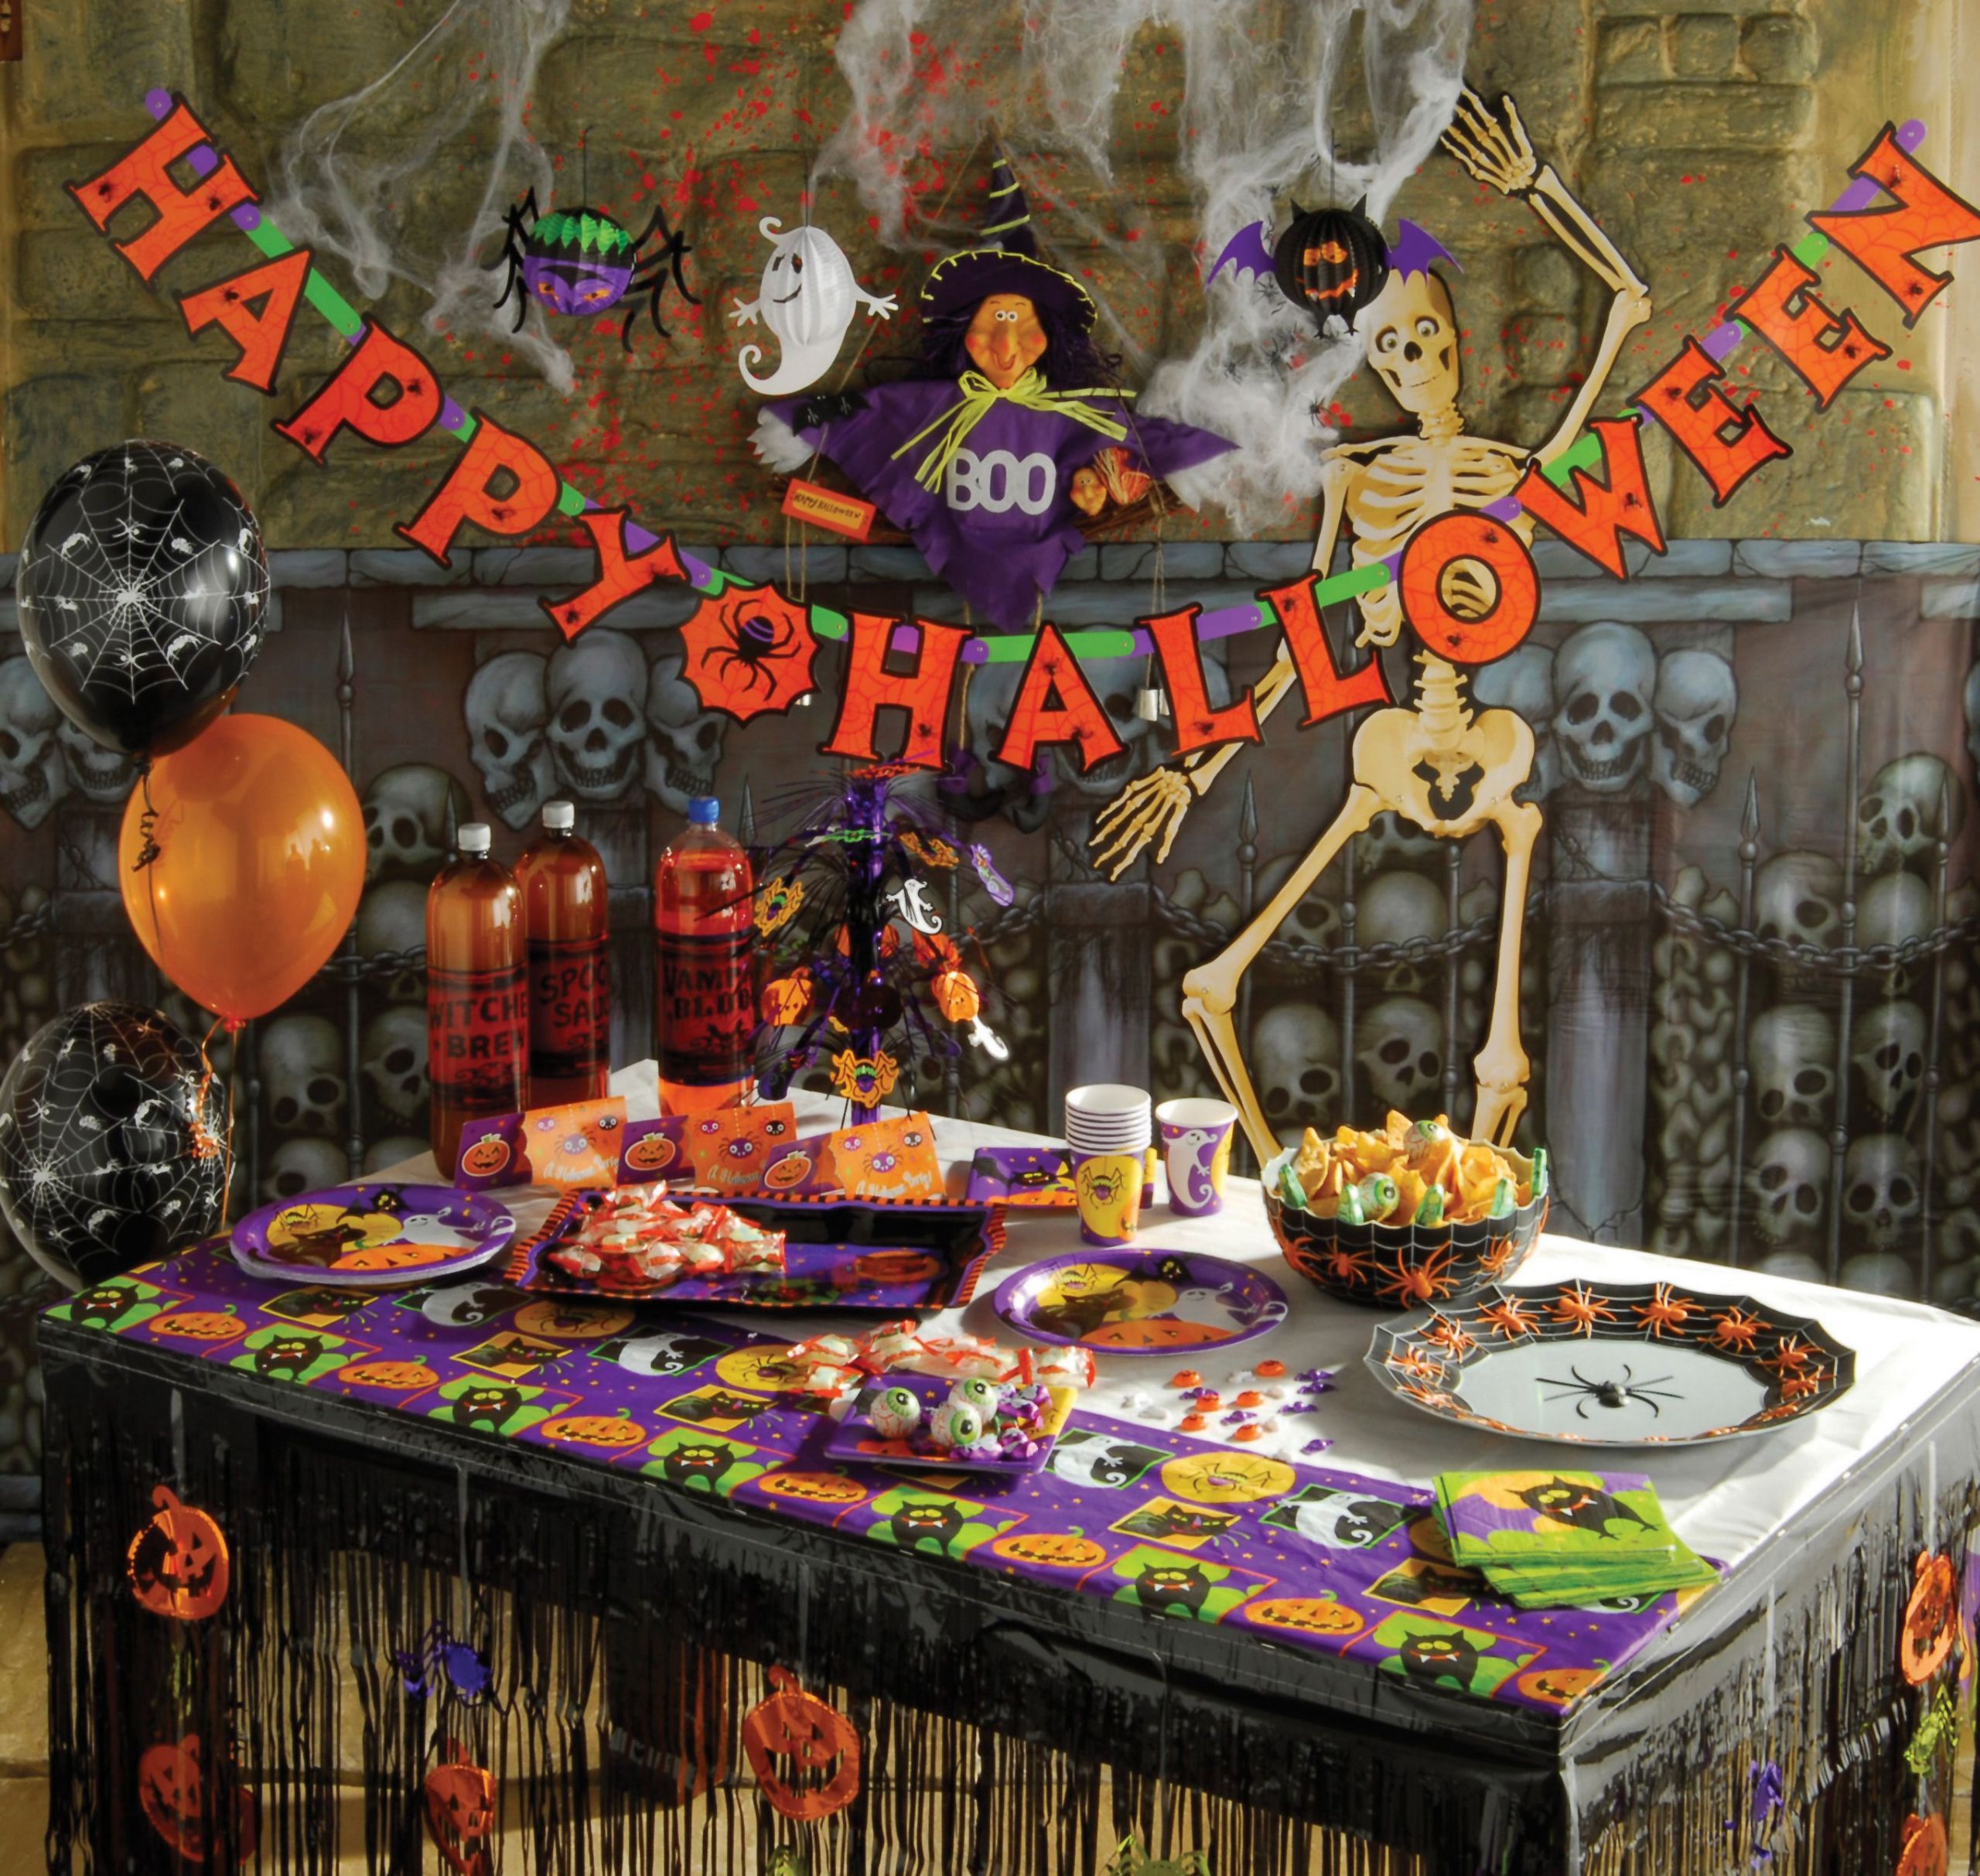 Halloween Party House Decorating Ideas
 20 Classic Halloween Decorations Ideas